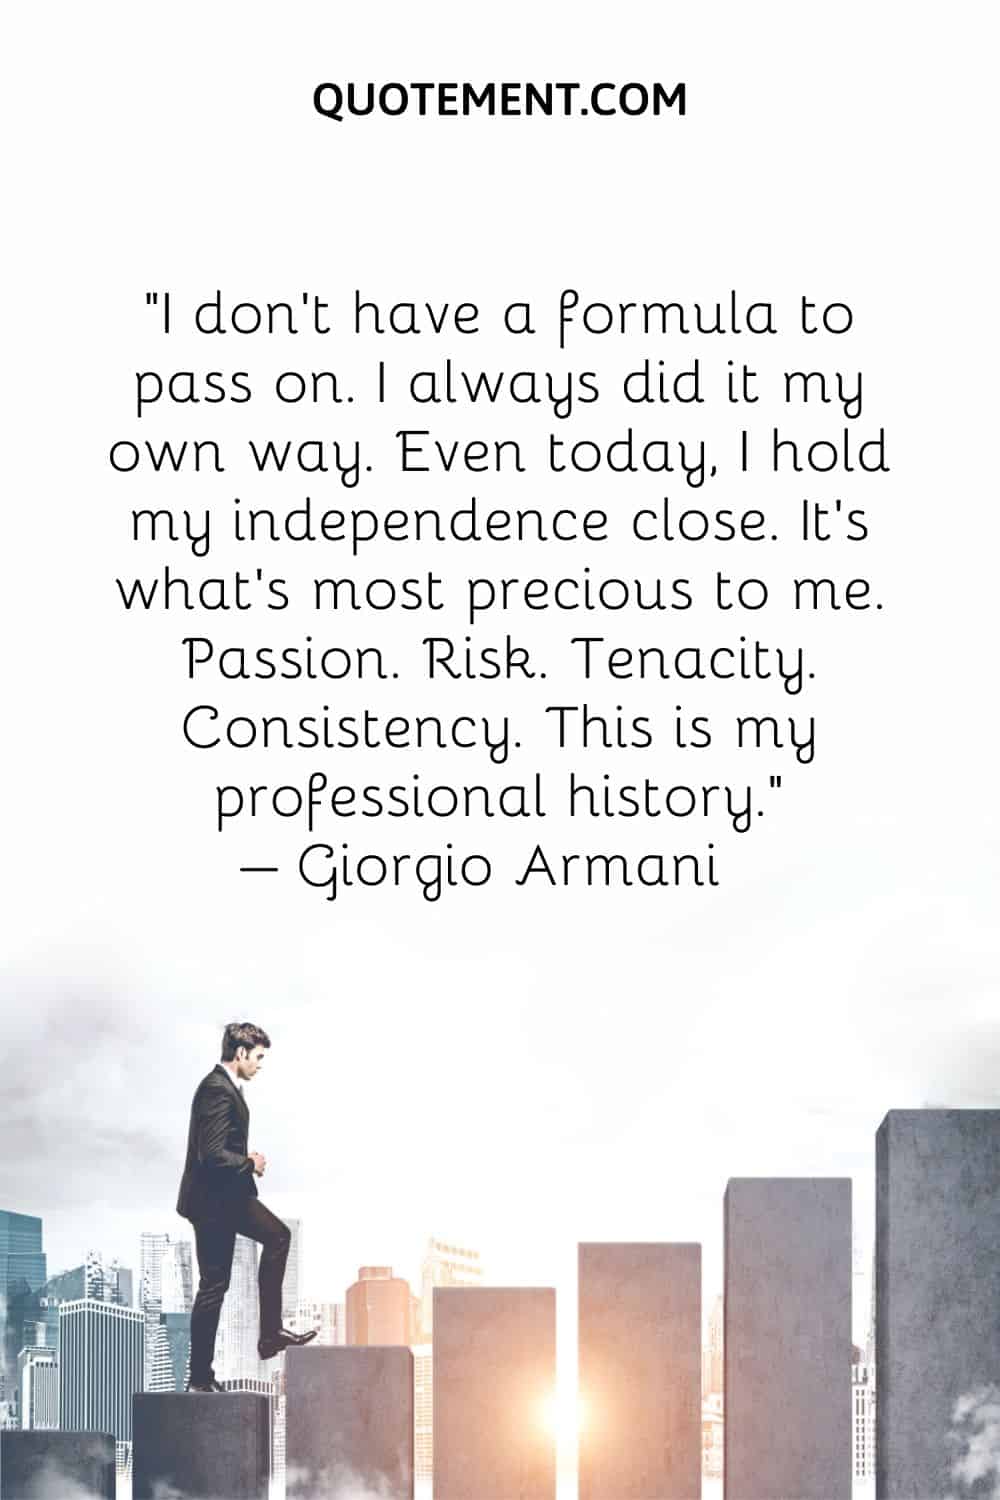 I don't have a formula to pass on. I always did it my own way